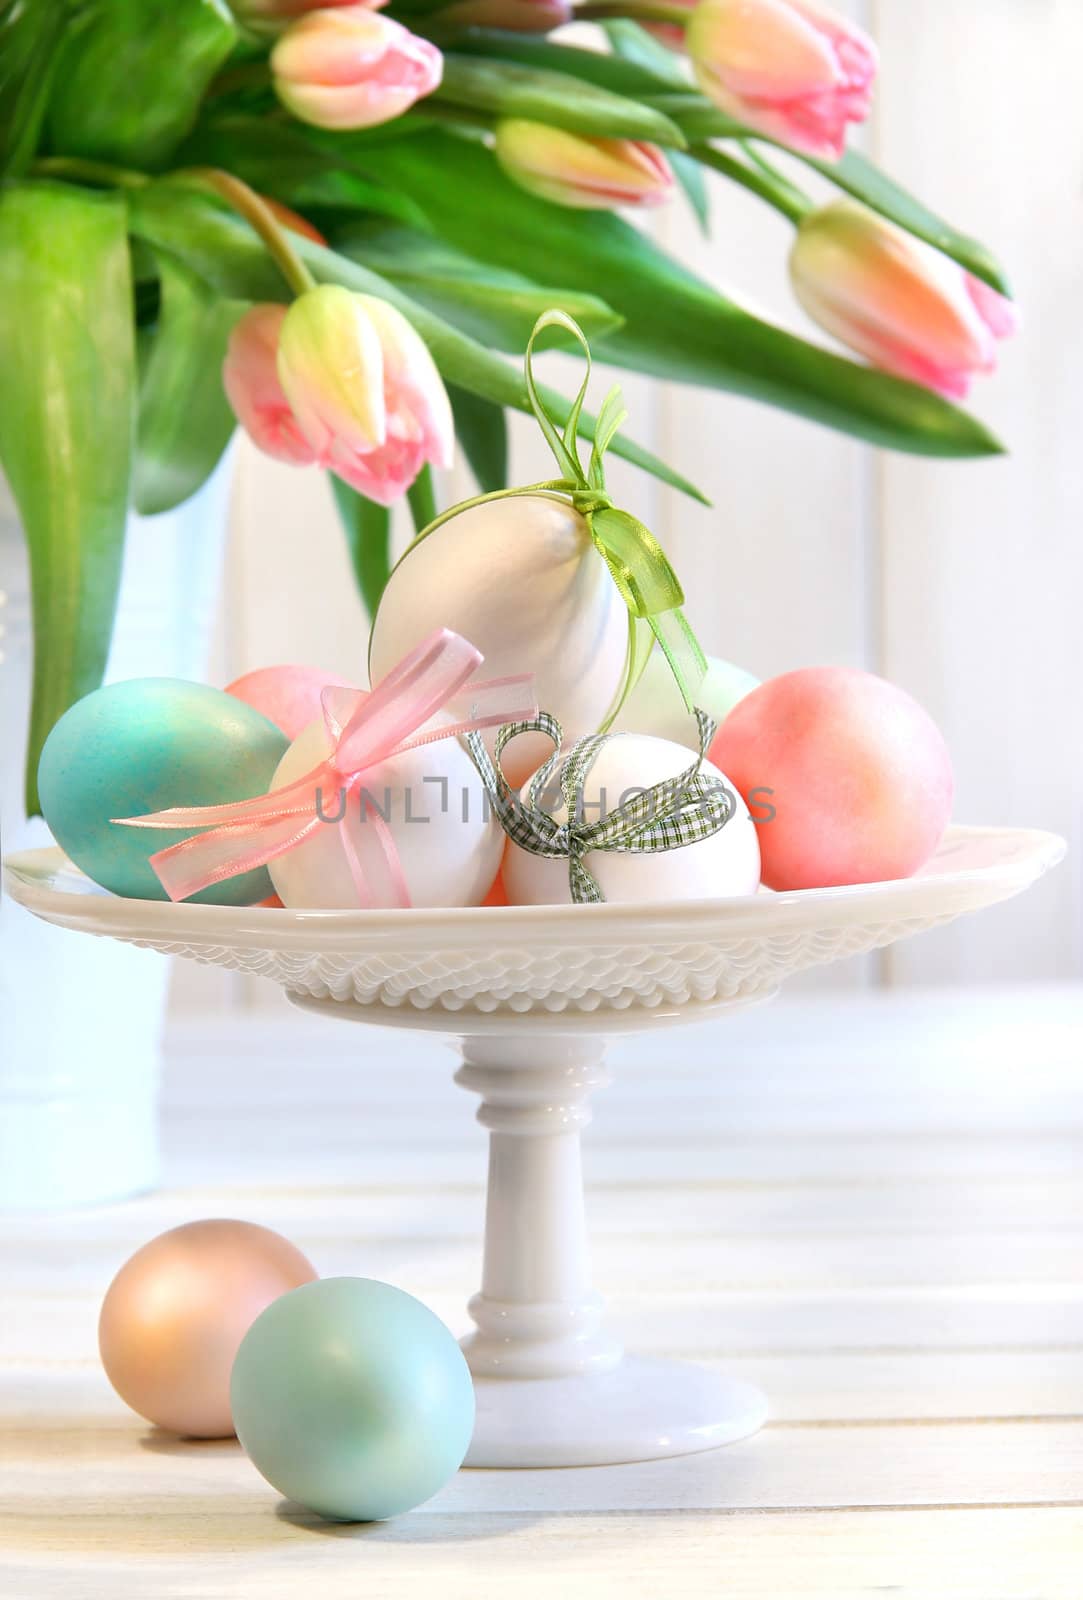 Colored eggs with bows and tulips by Sandralise